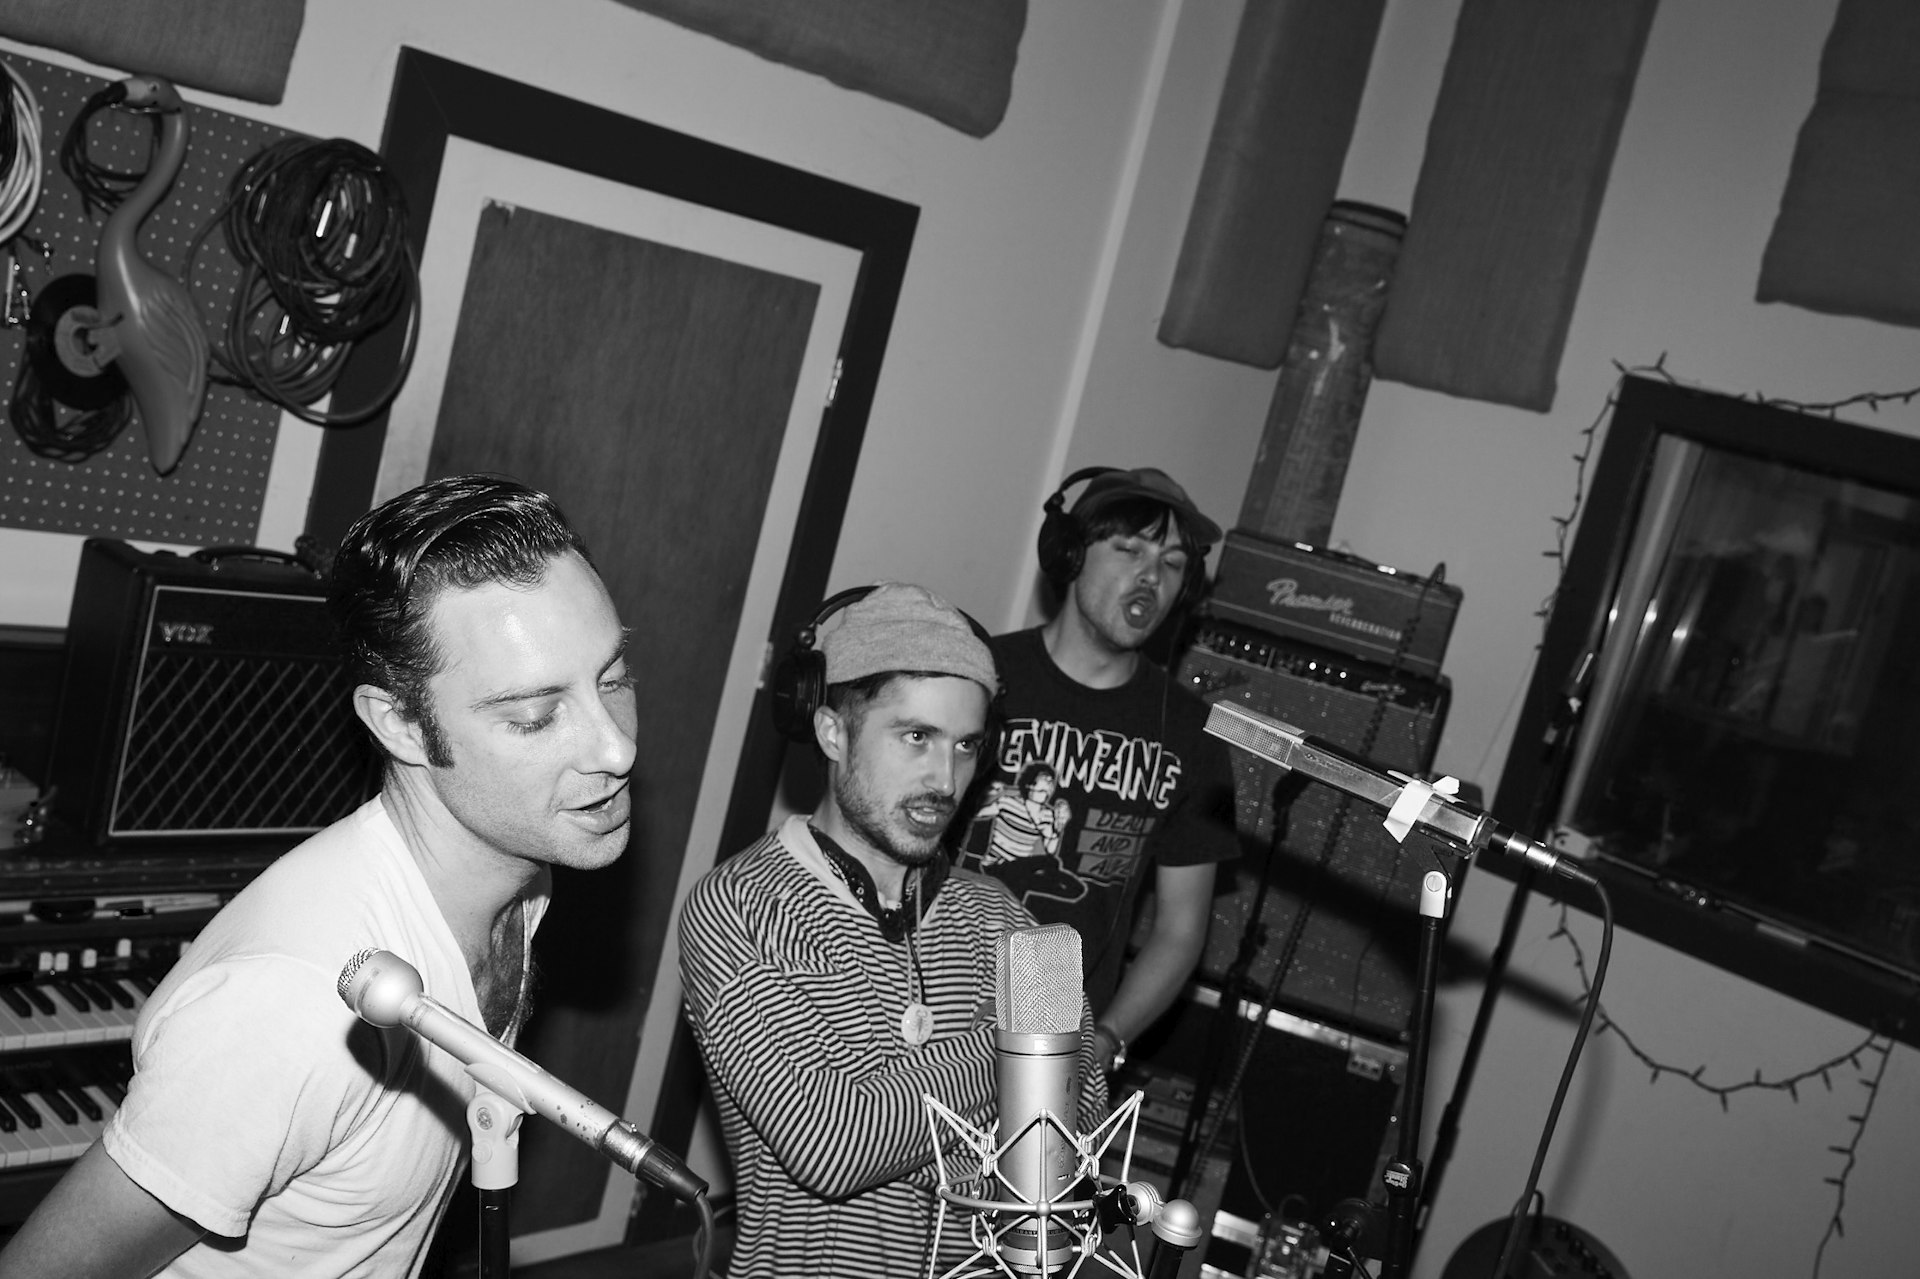 Riotous Southern punks Black Lips on their new album and other folk tales from the road